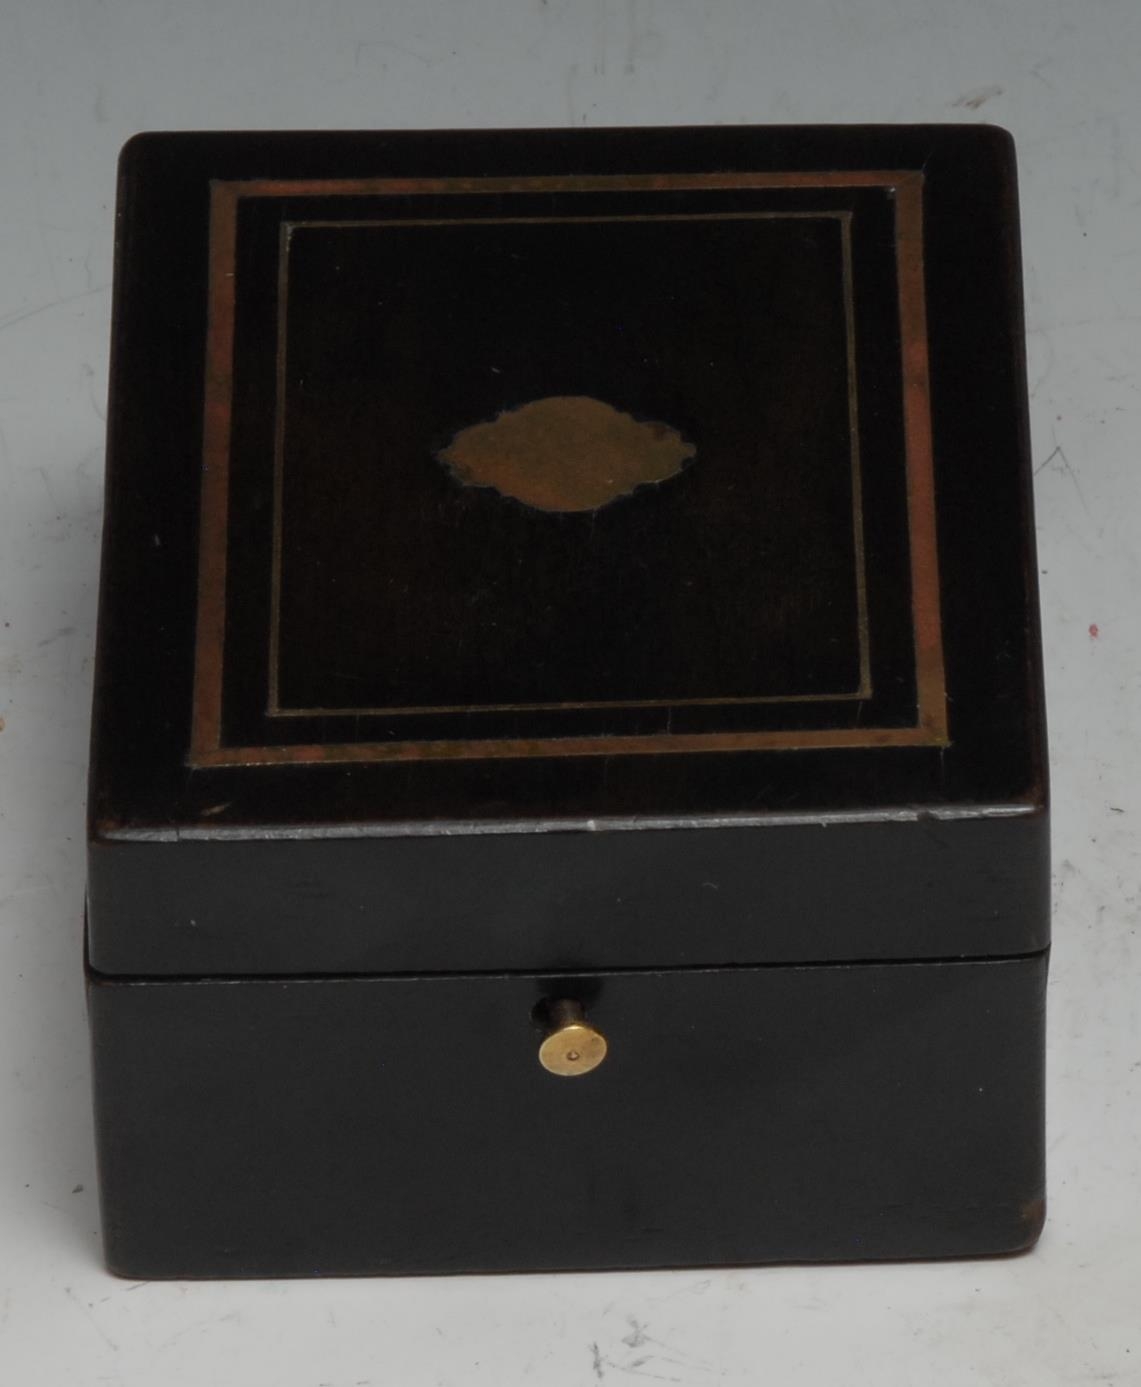 A 19th century French ebonised rectangular pocket watch box, hinged cover inlaid with a brass